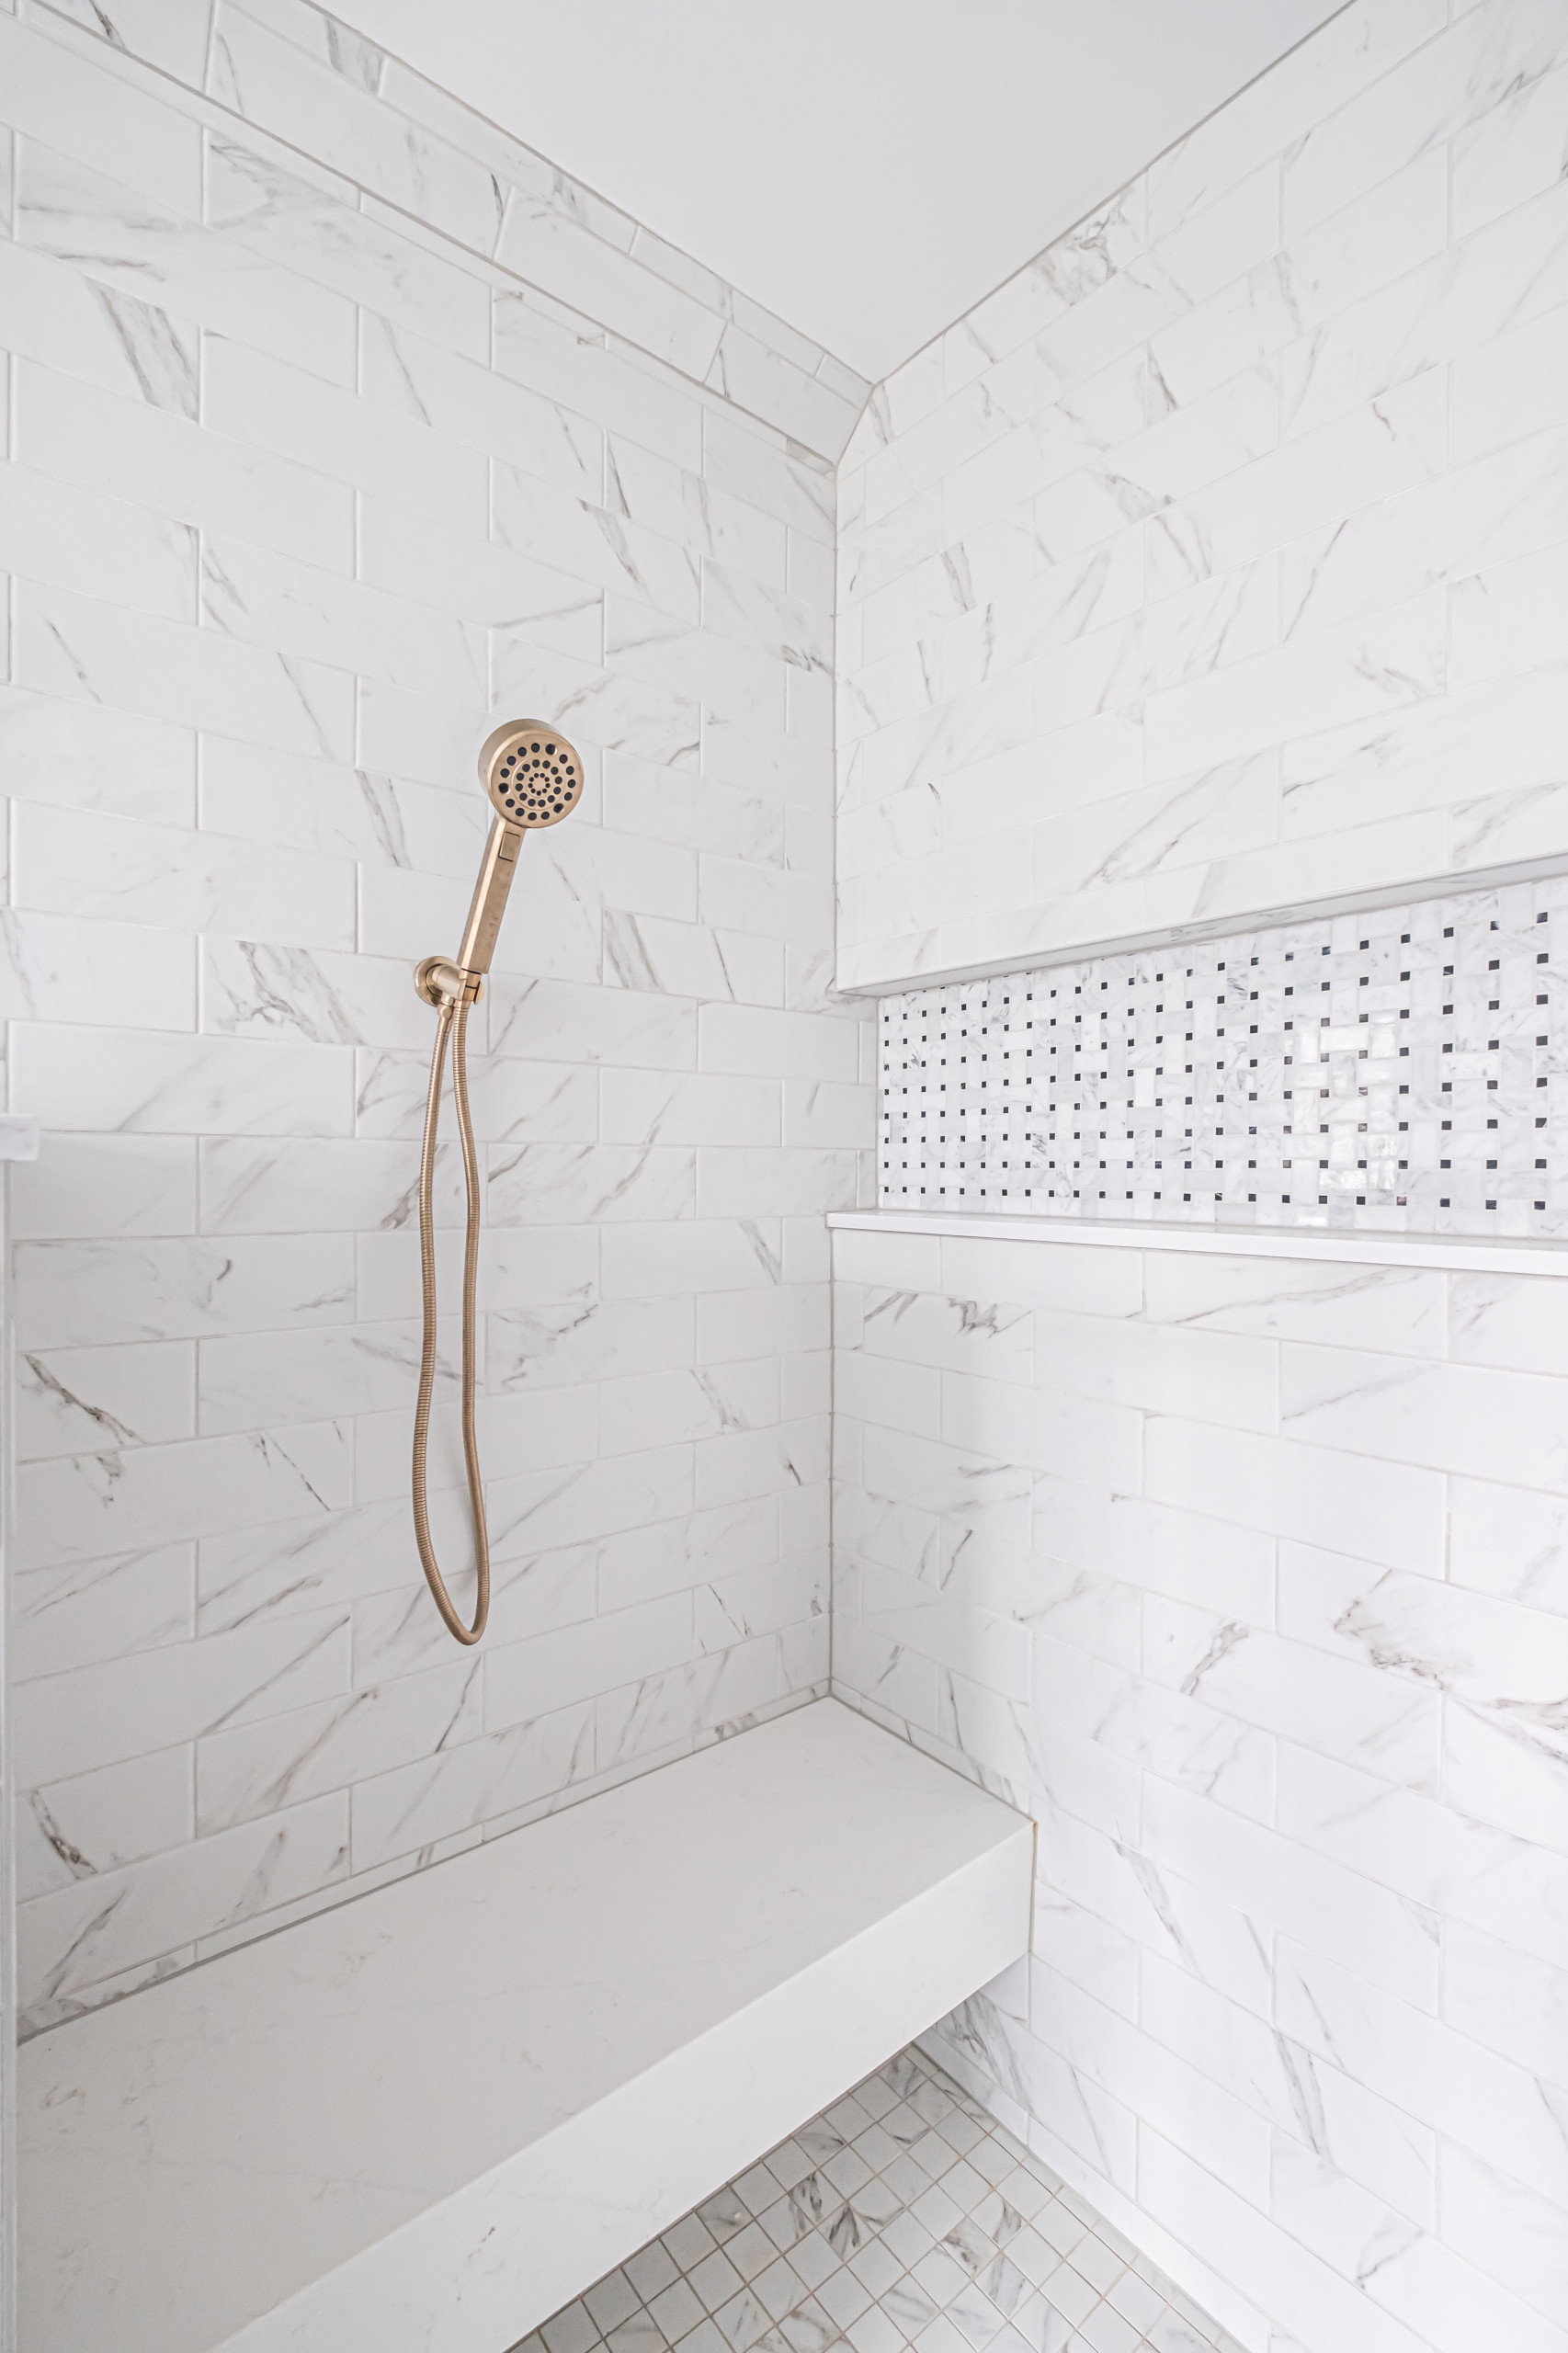 Shower with Marble Floating Shower Bench - Transitional - Bathroom